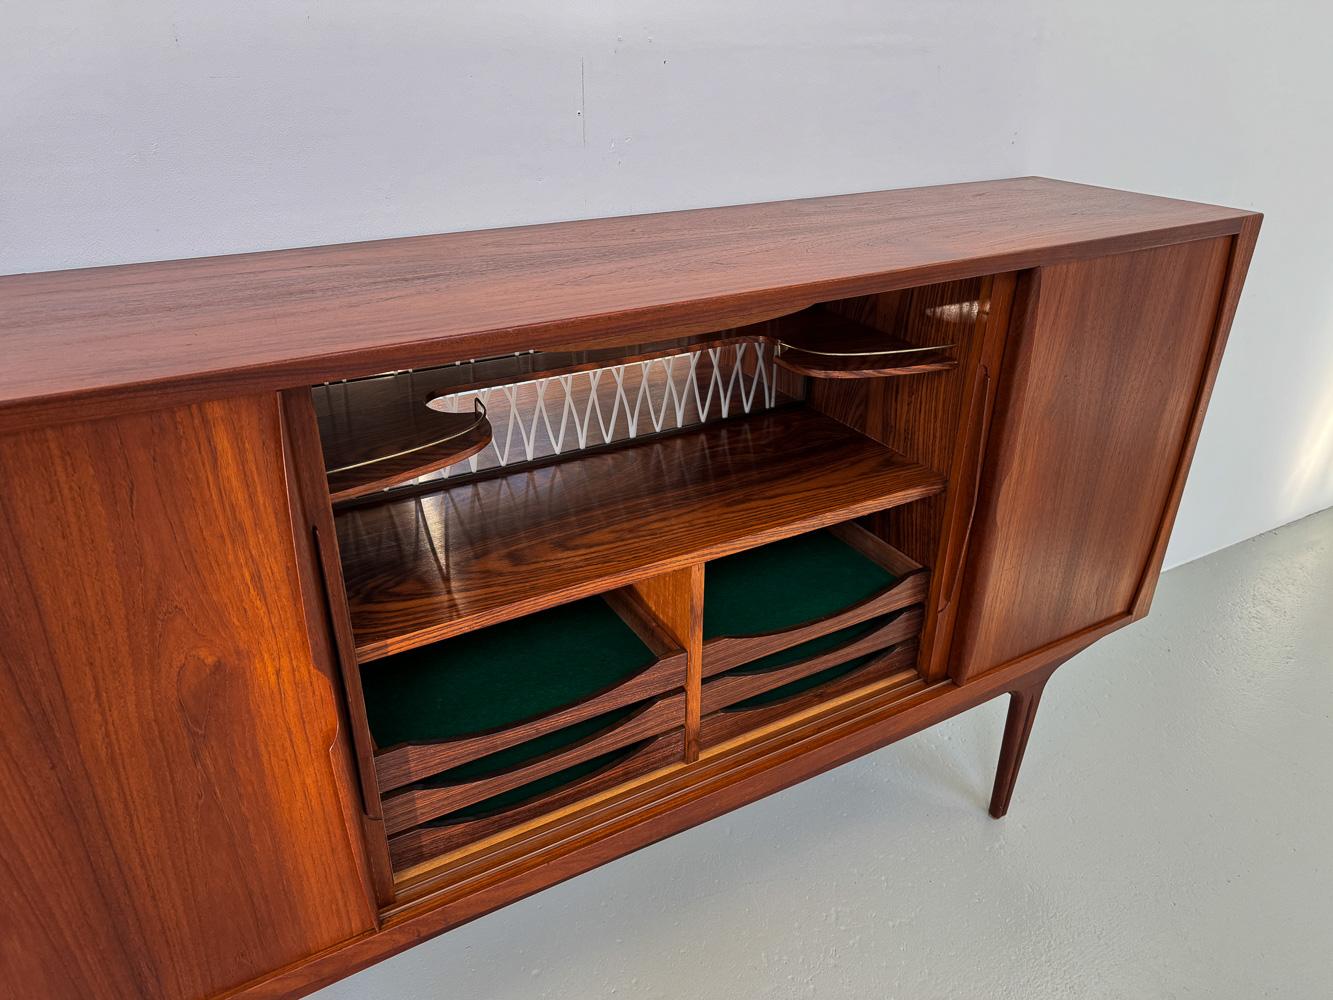 Danish Mid-Century Teak Credenza with Bar by Vantinge, 1960s. In Good Condition For Sale In Asaa, DK